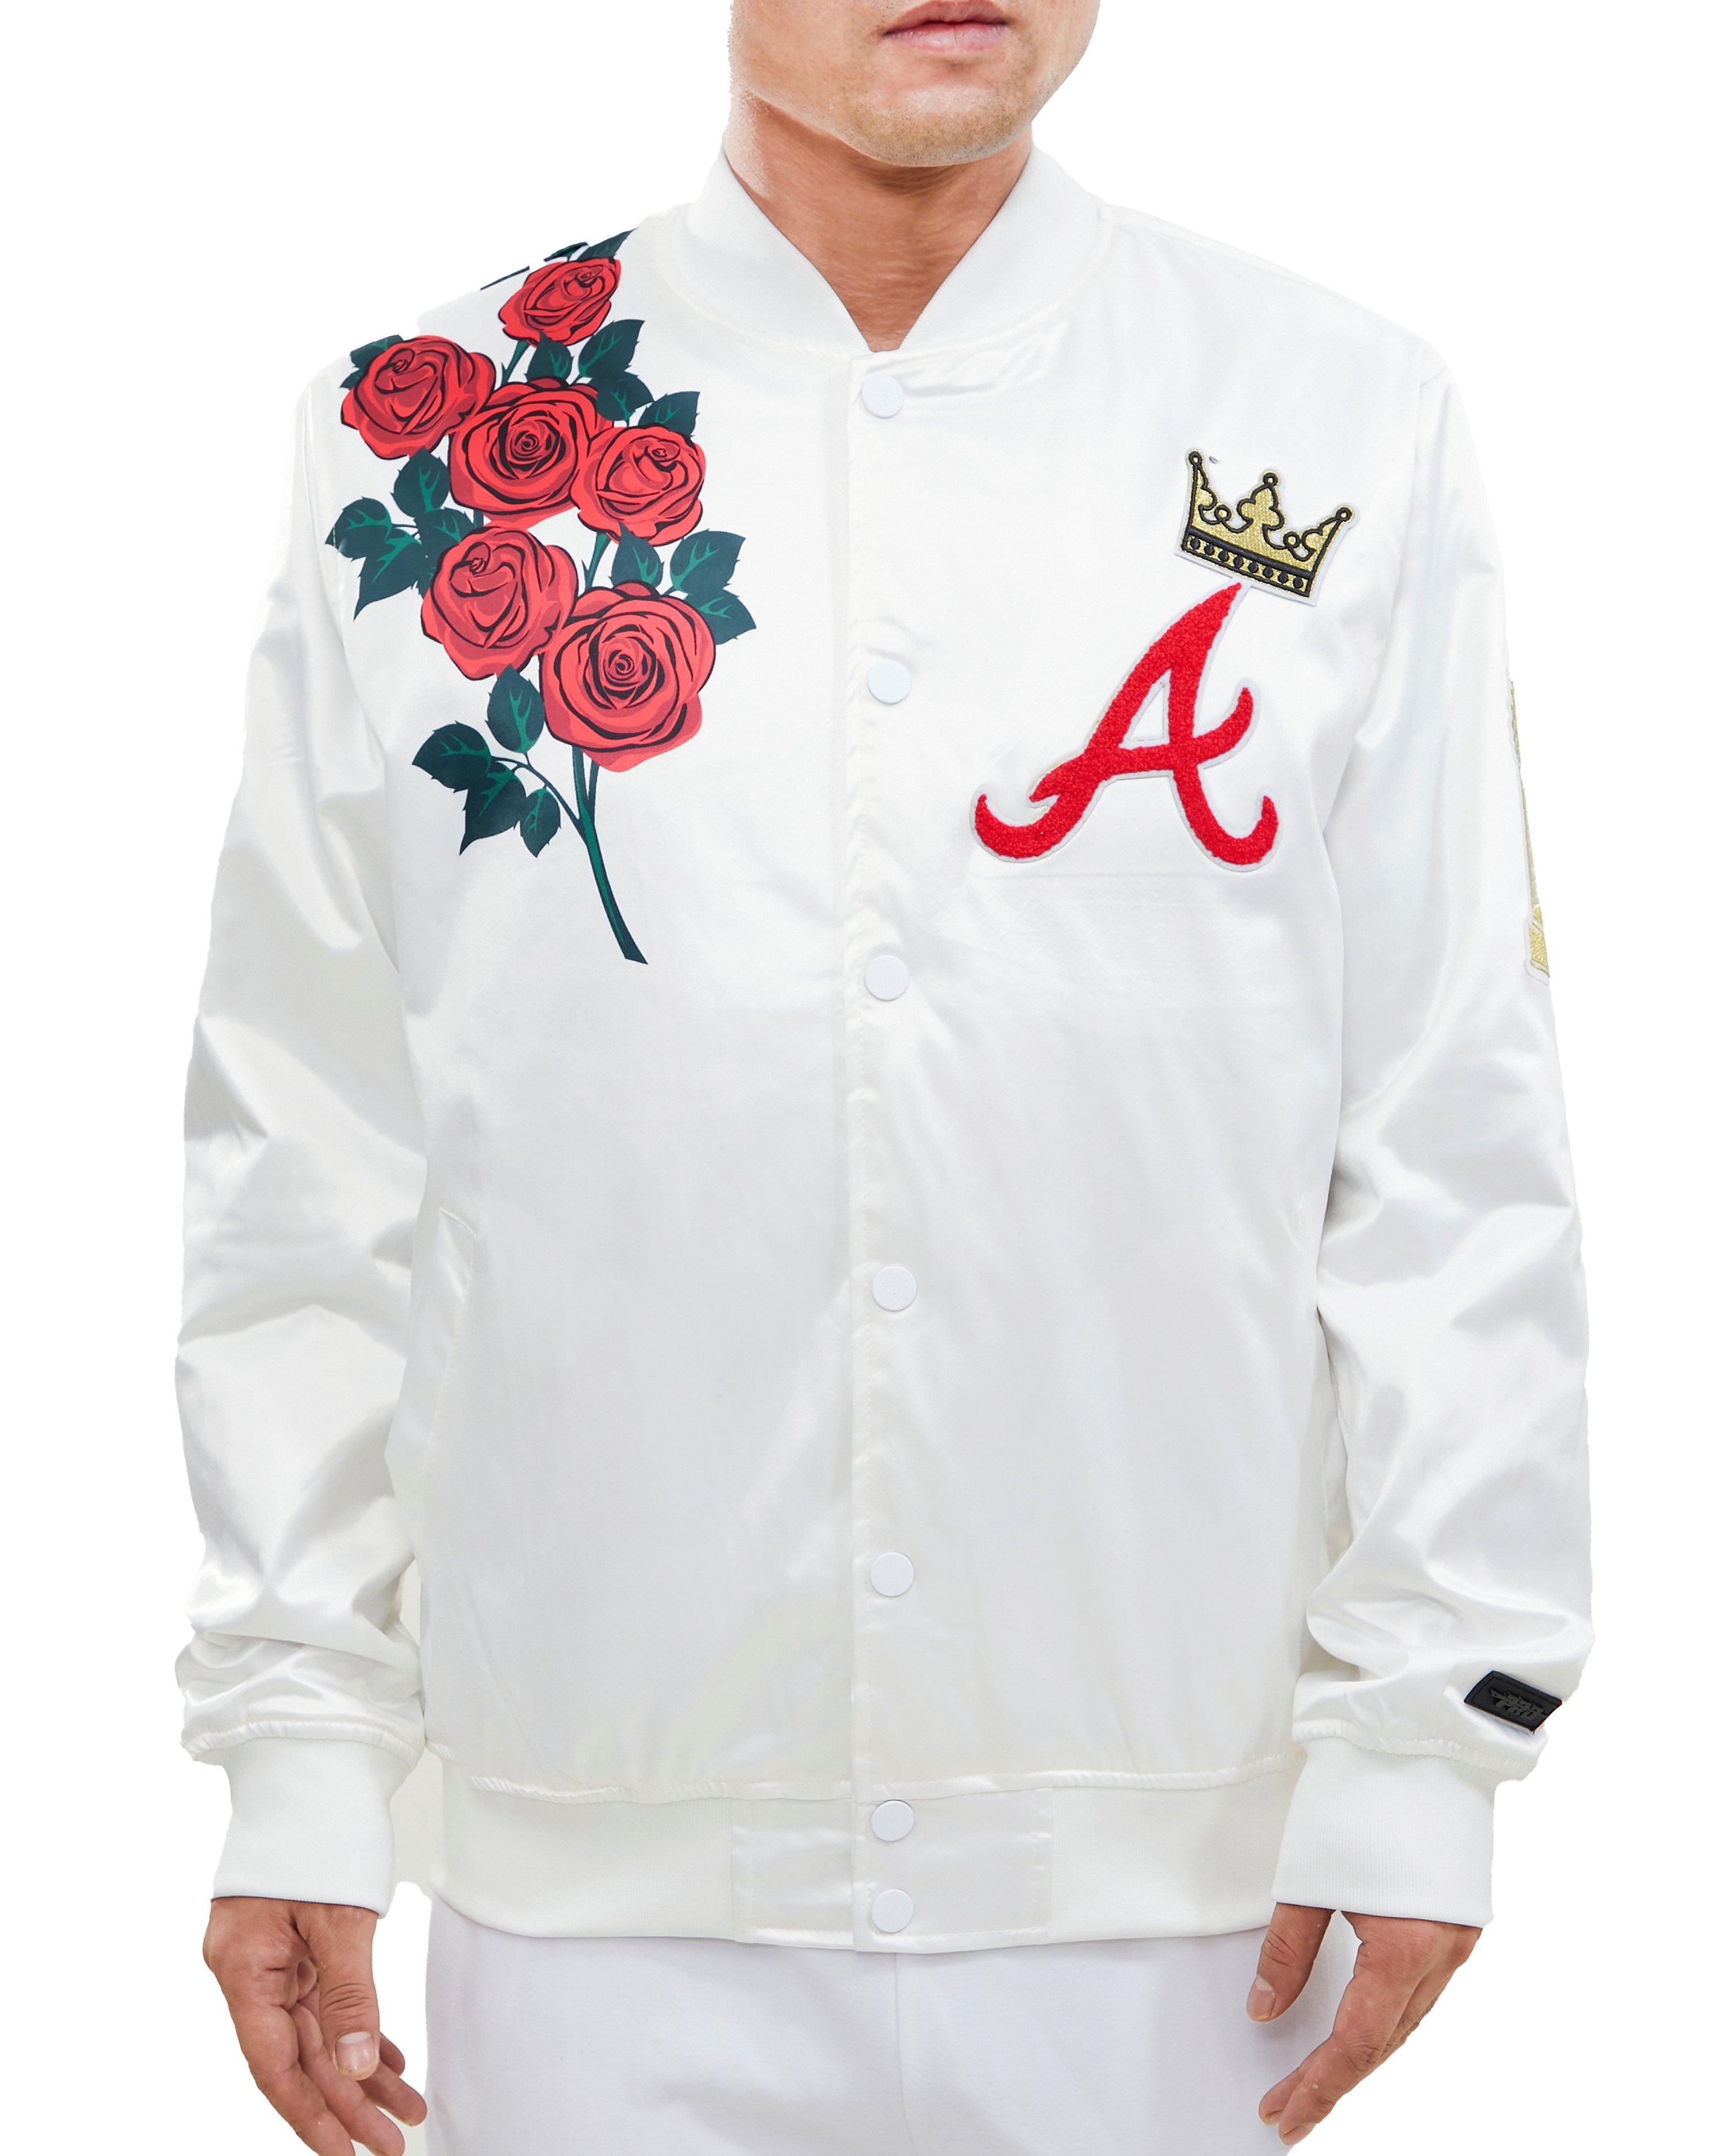 Step up your winter style with a satin jacket from the Braves Clubhouse  Store